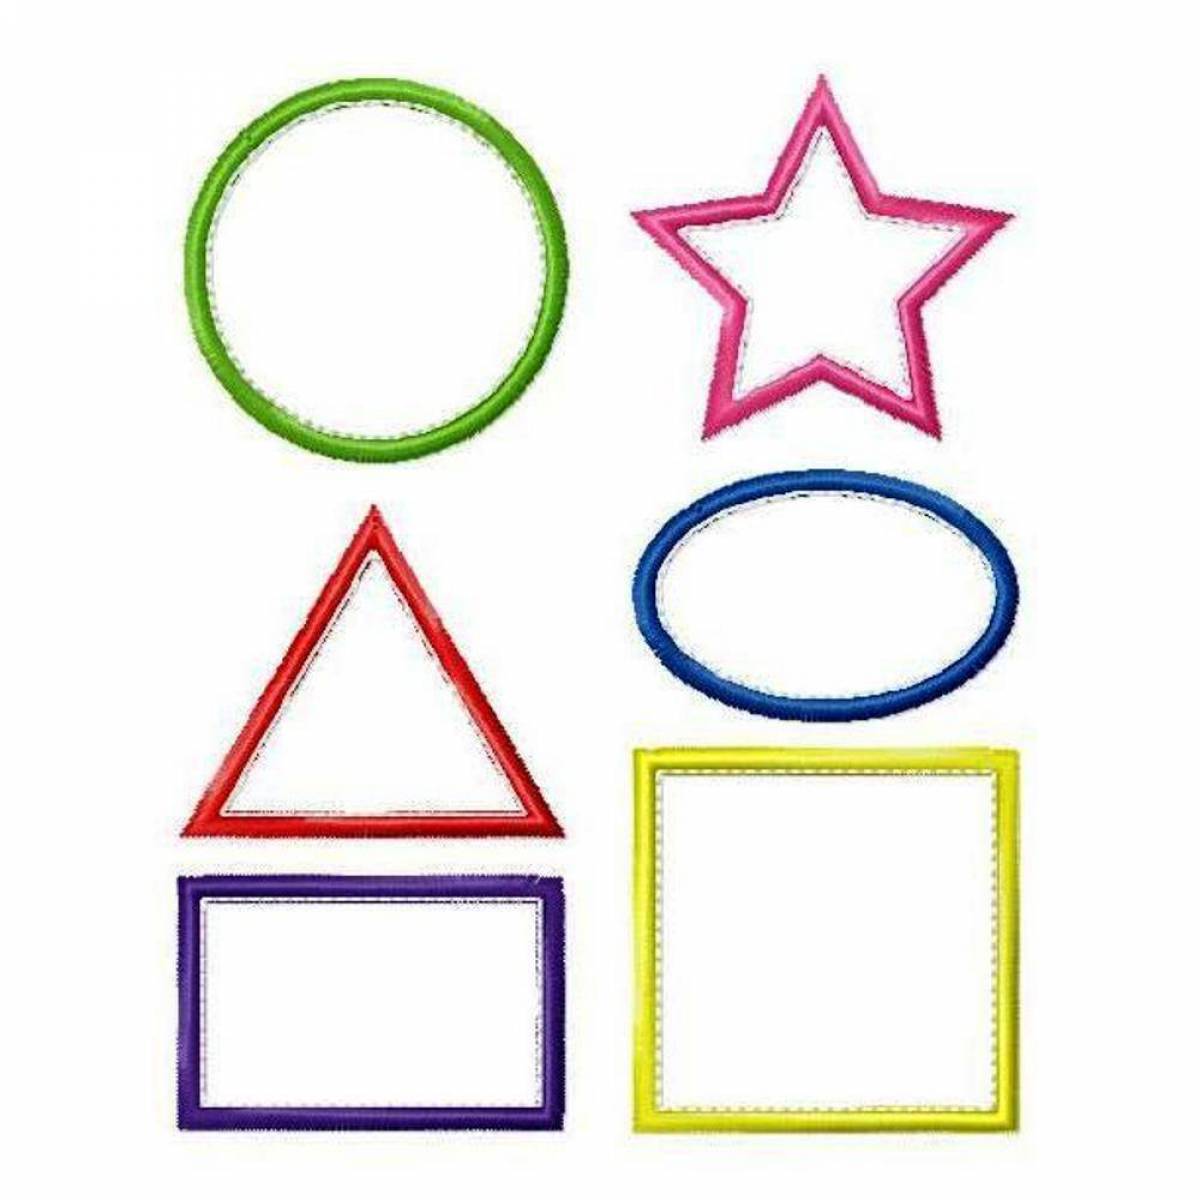 Coloring colorful geometric shapes for children 3-4 years old